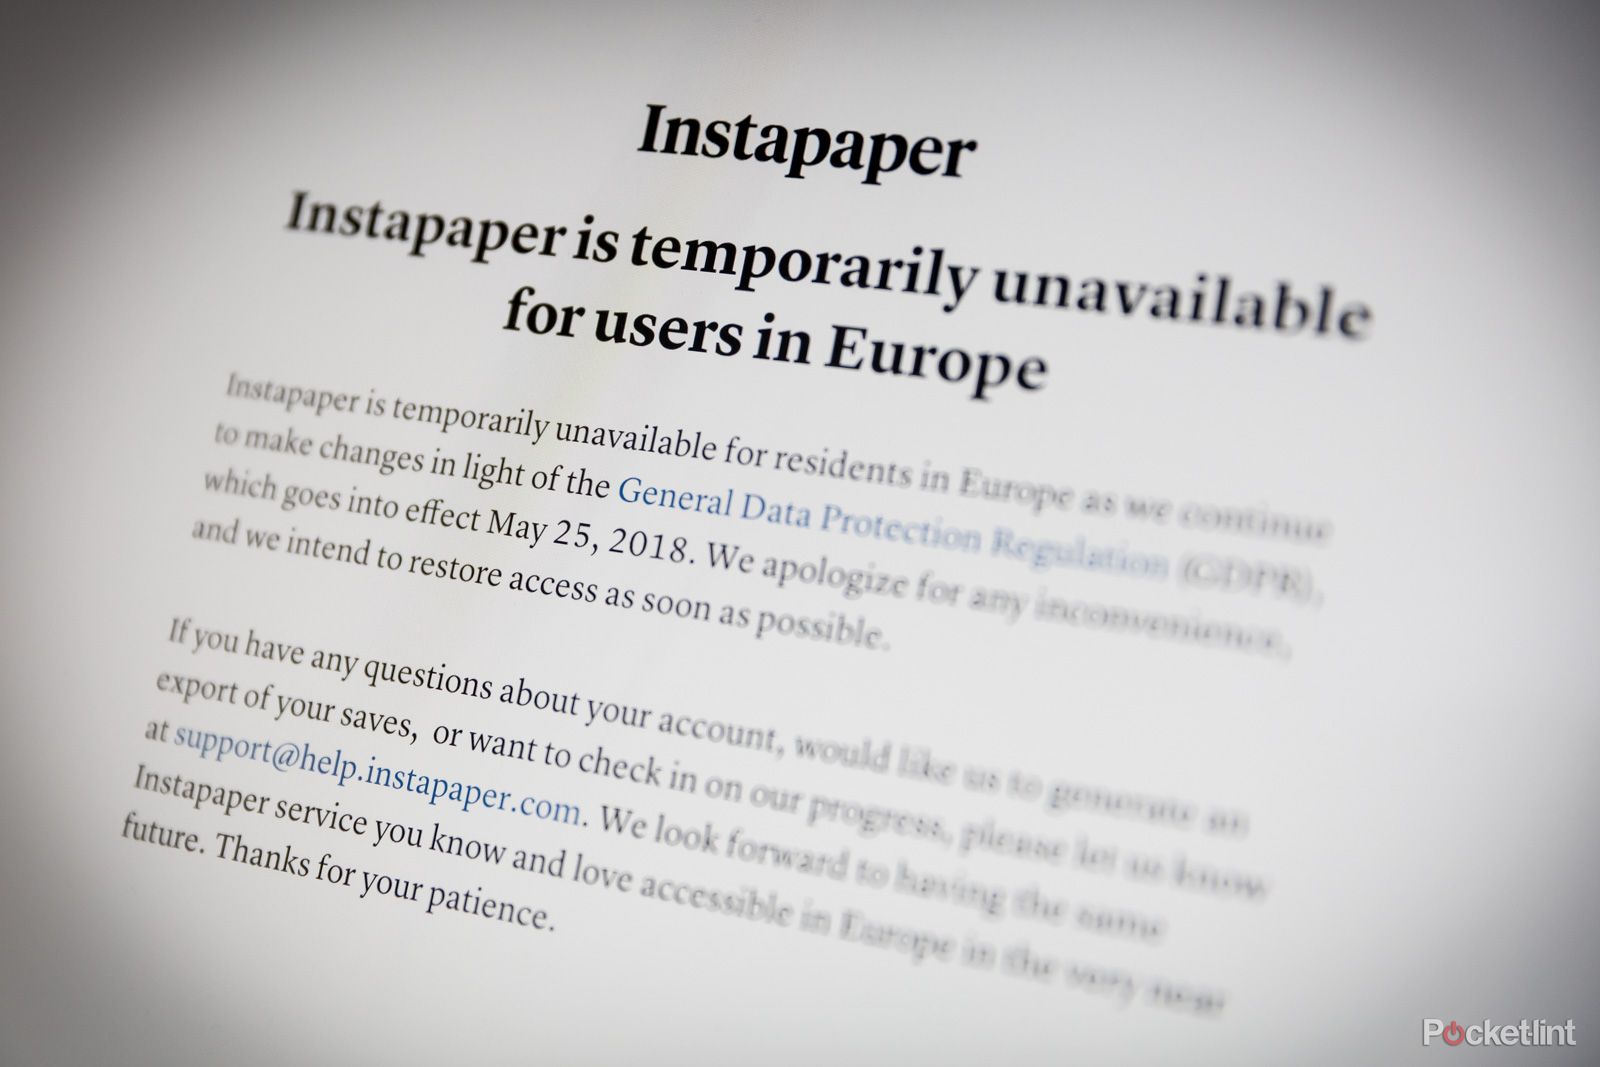 How To Get Round The Instapaper Outage In Europe image 1